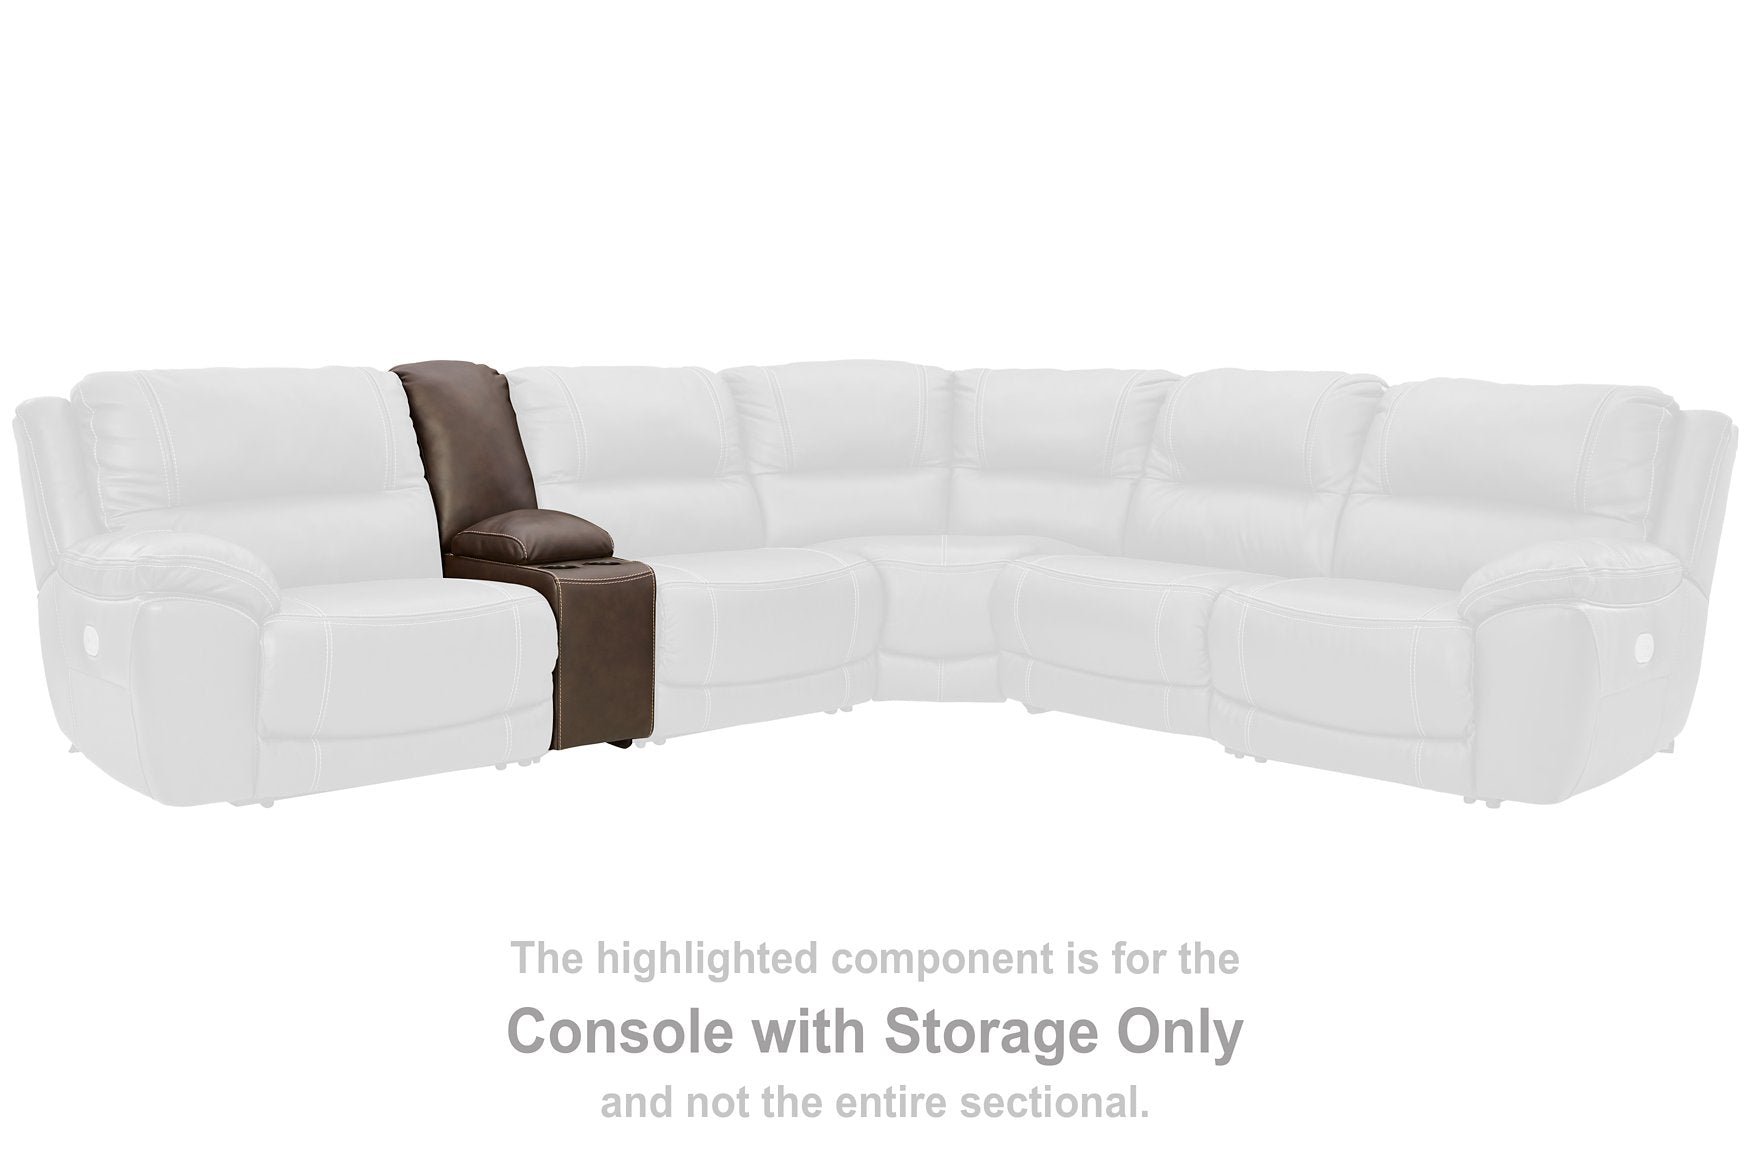 Dunleith 3-Piece Power Reclining Loveseat with Console